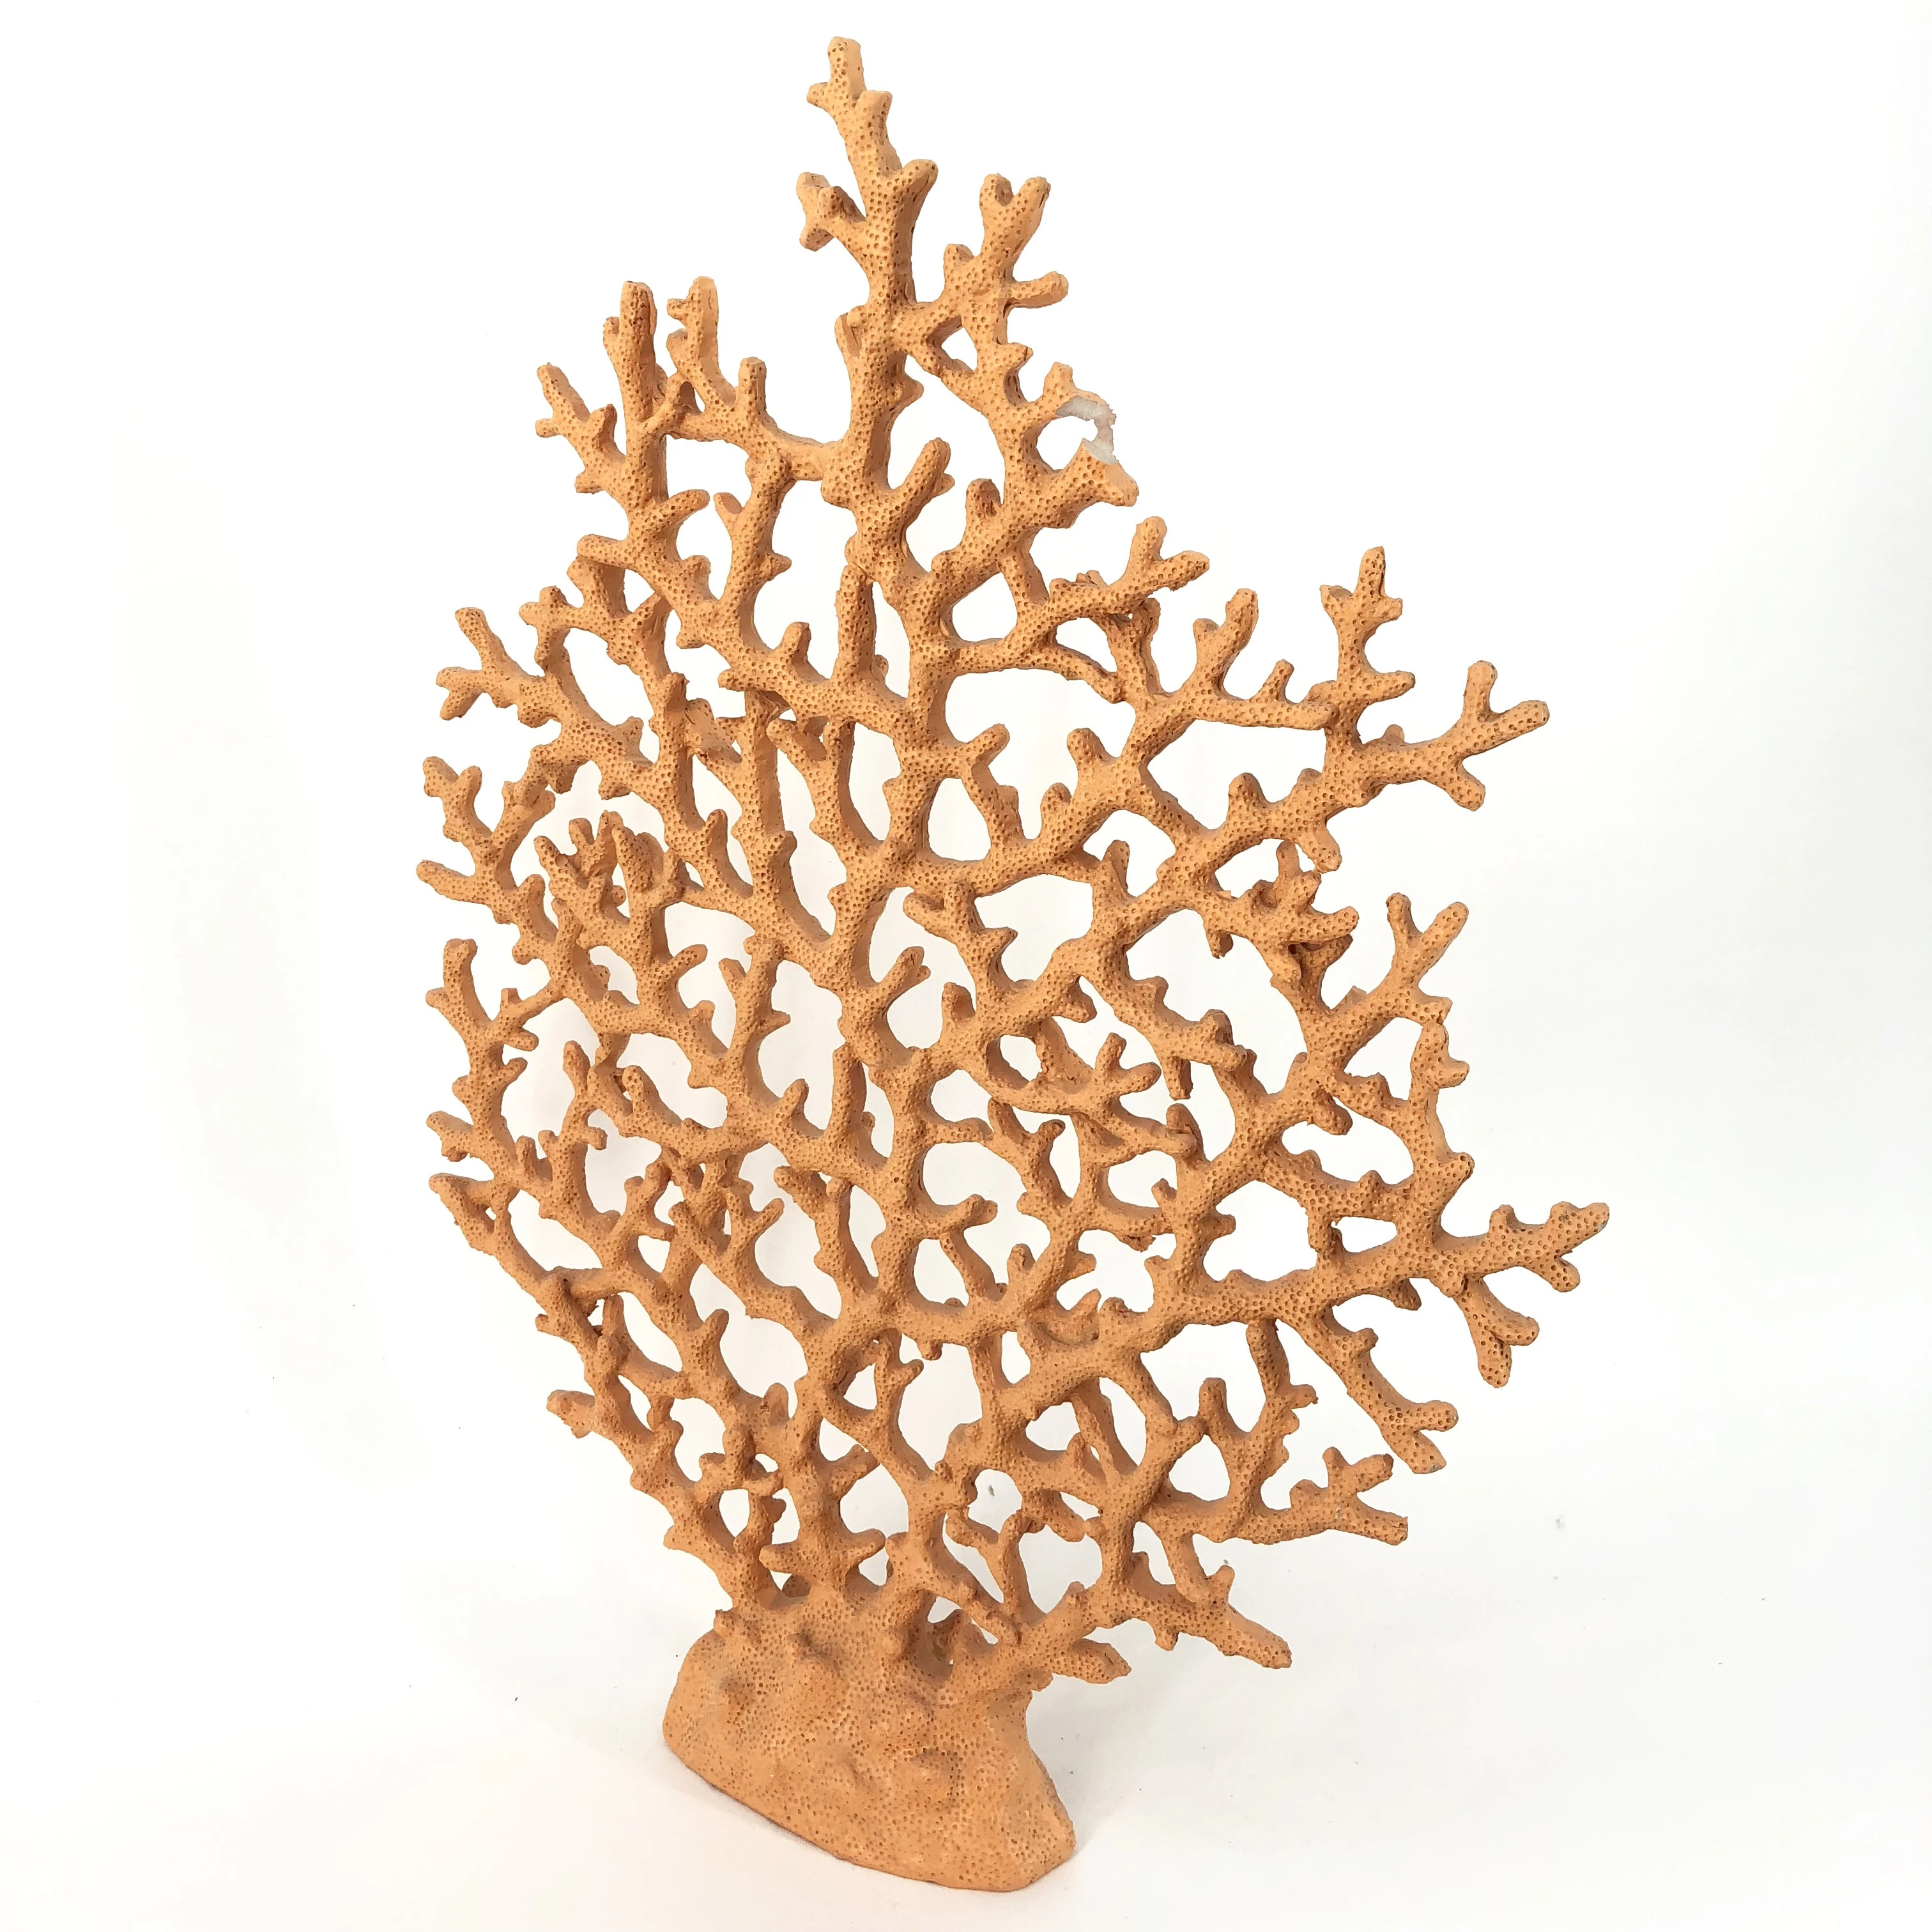 Hot sale Resin artificial coral tree decorative resin home decor